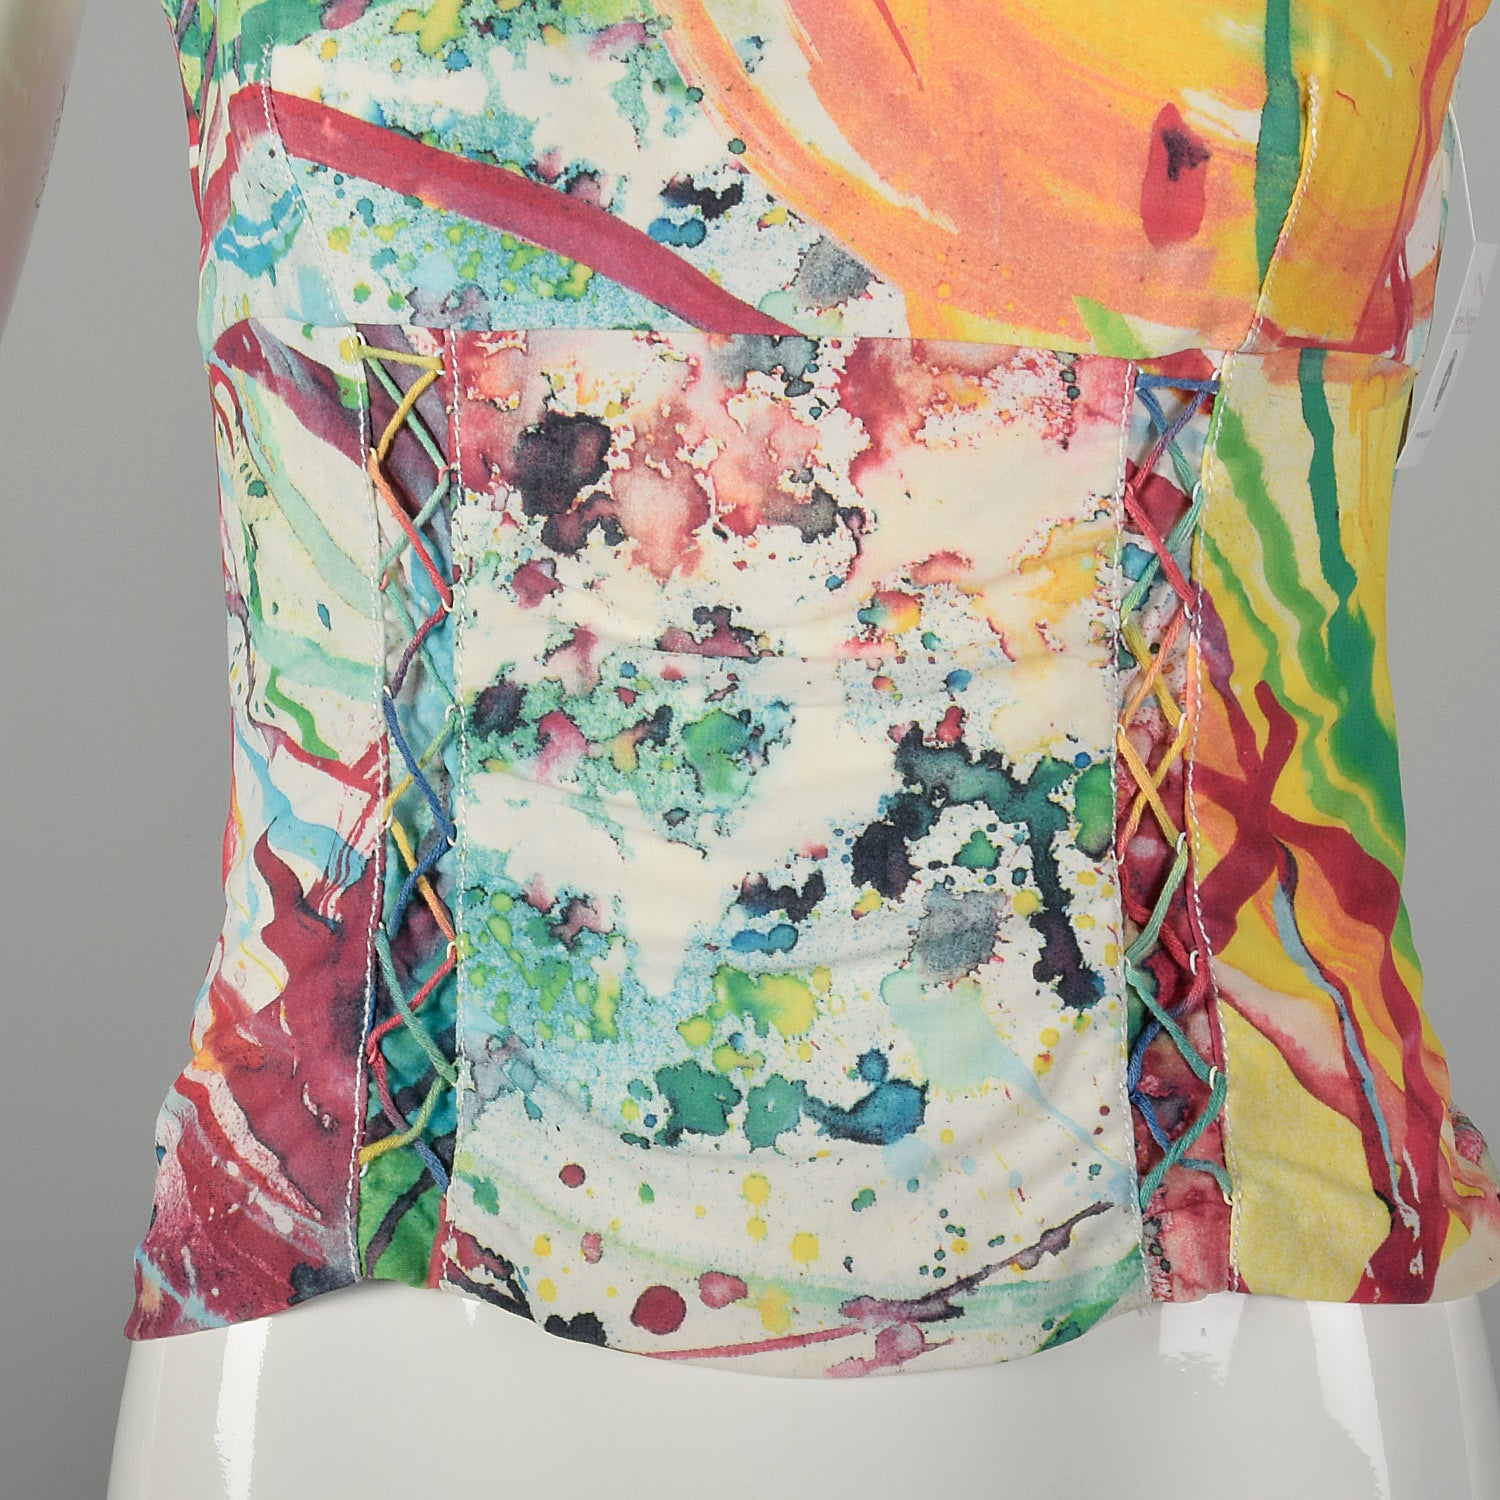 Alberto Makali Multi-Color Abstract Print Stretch Top and Matching Jean Jacket Set